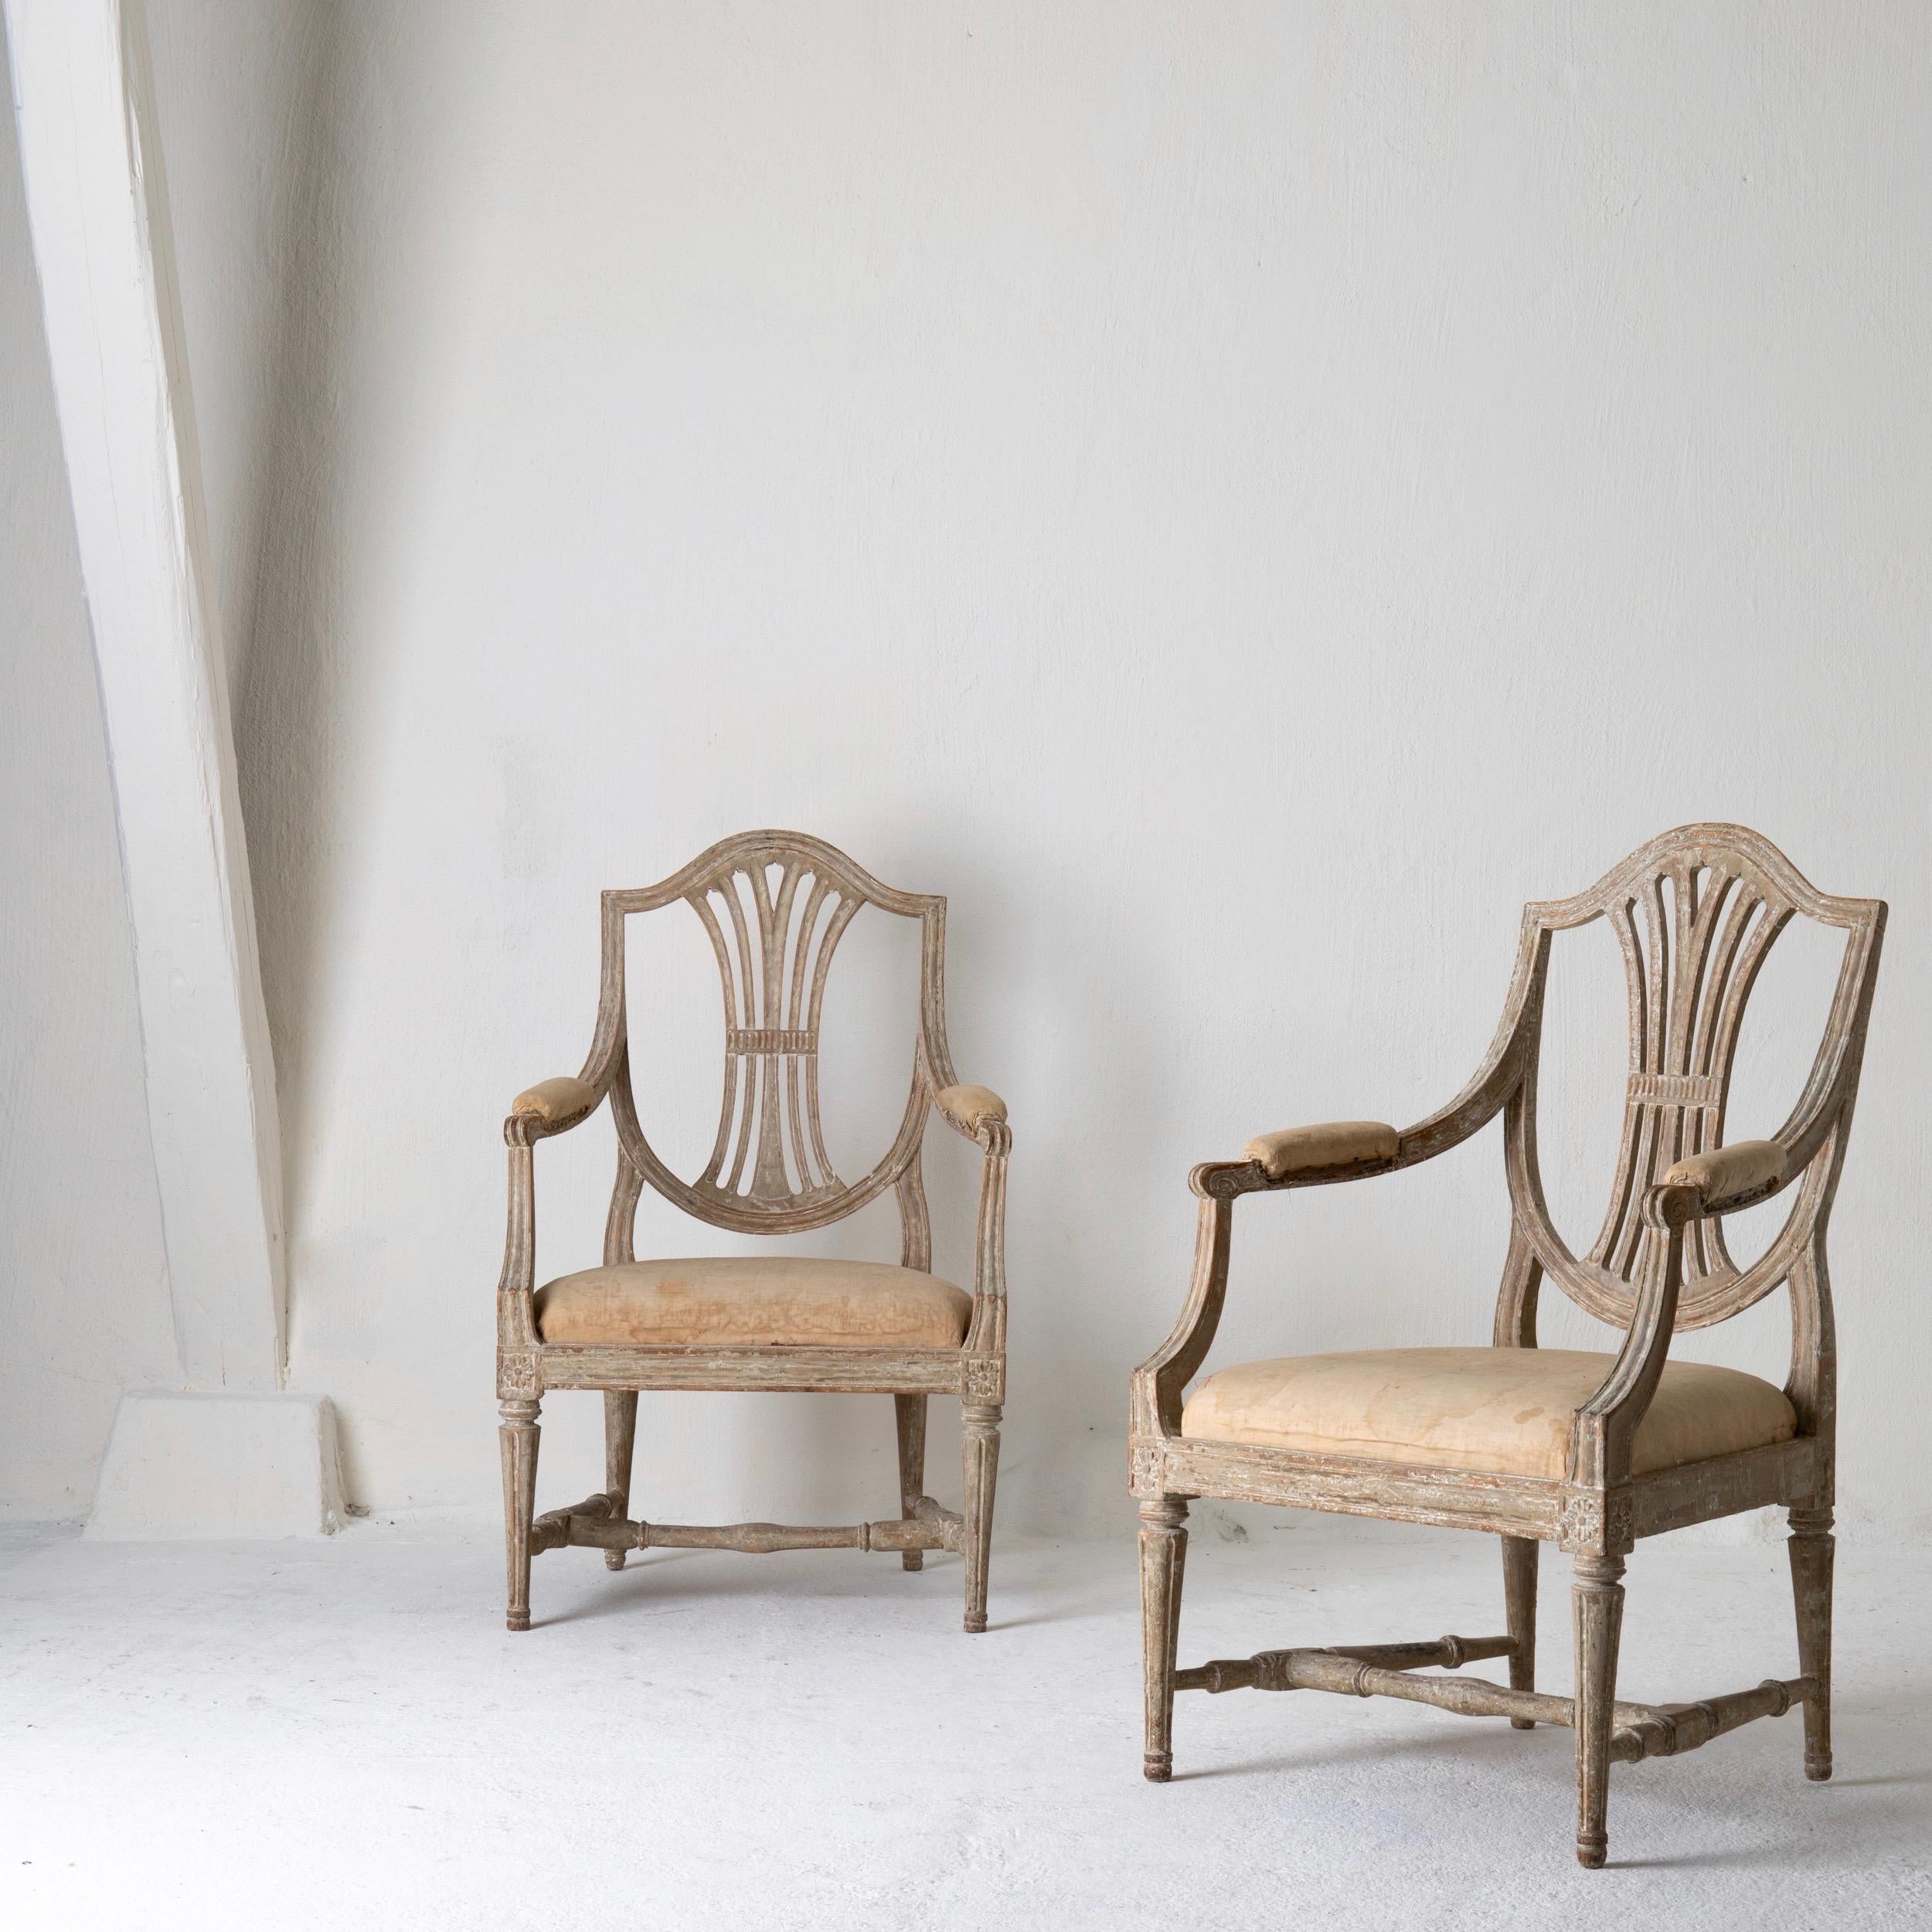 A pair of armchairs made during the Gustavian period in Sweden 1790-1810. Stripped to their original greenish gray finish. Beautiful carvings.

 